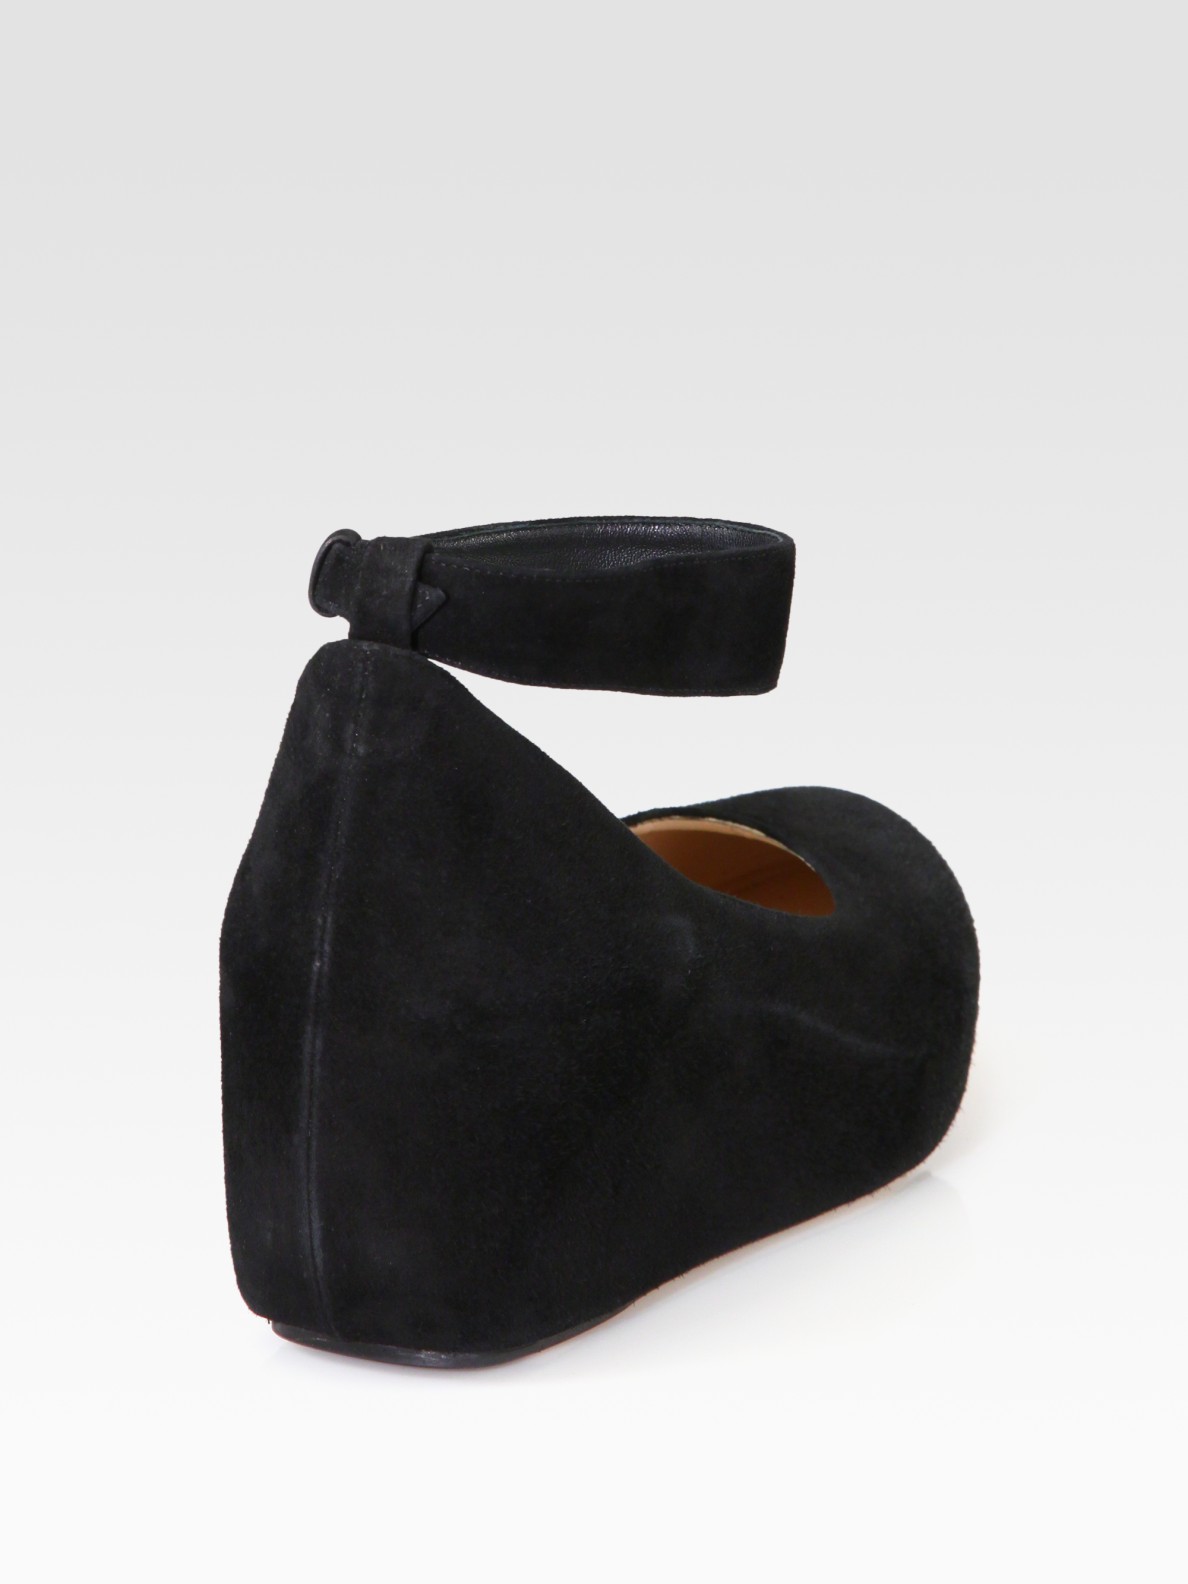 Chloé Suede Ankle Strap Wedge Pumps in Black | Lyst